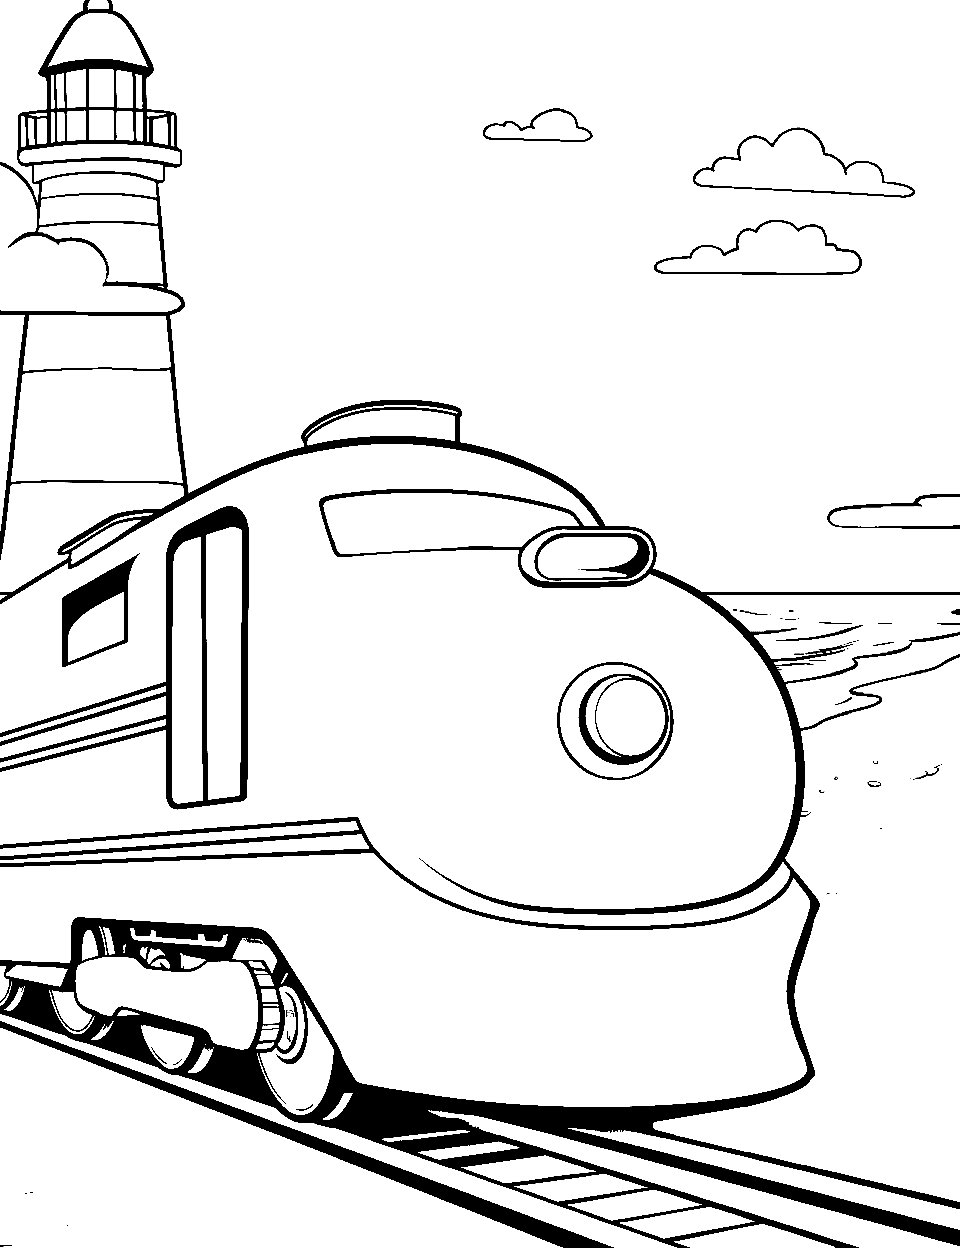 Lighthouse Coastal Train Coloring Page - A train passing by a towering lighthouse on the coast.